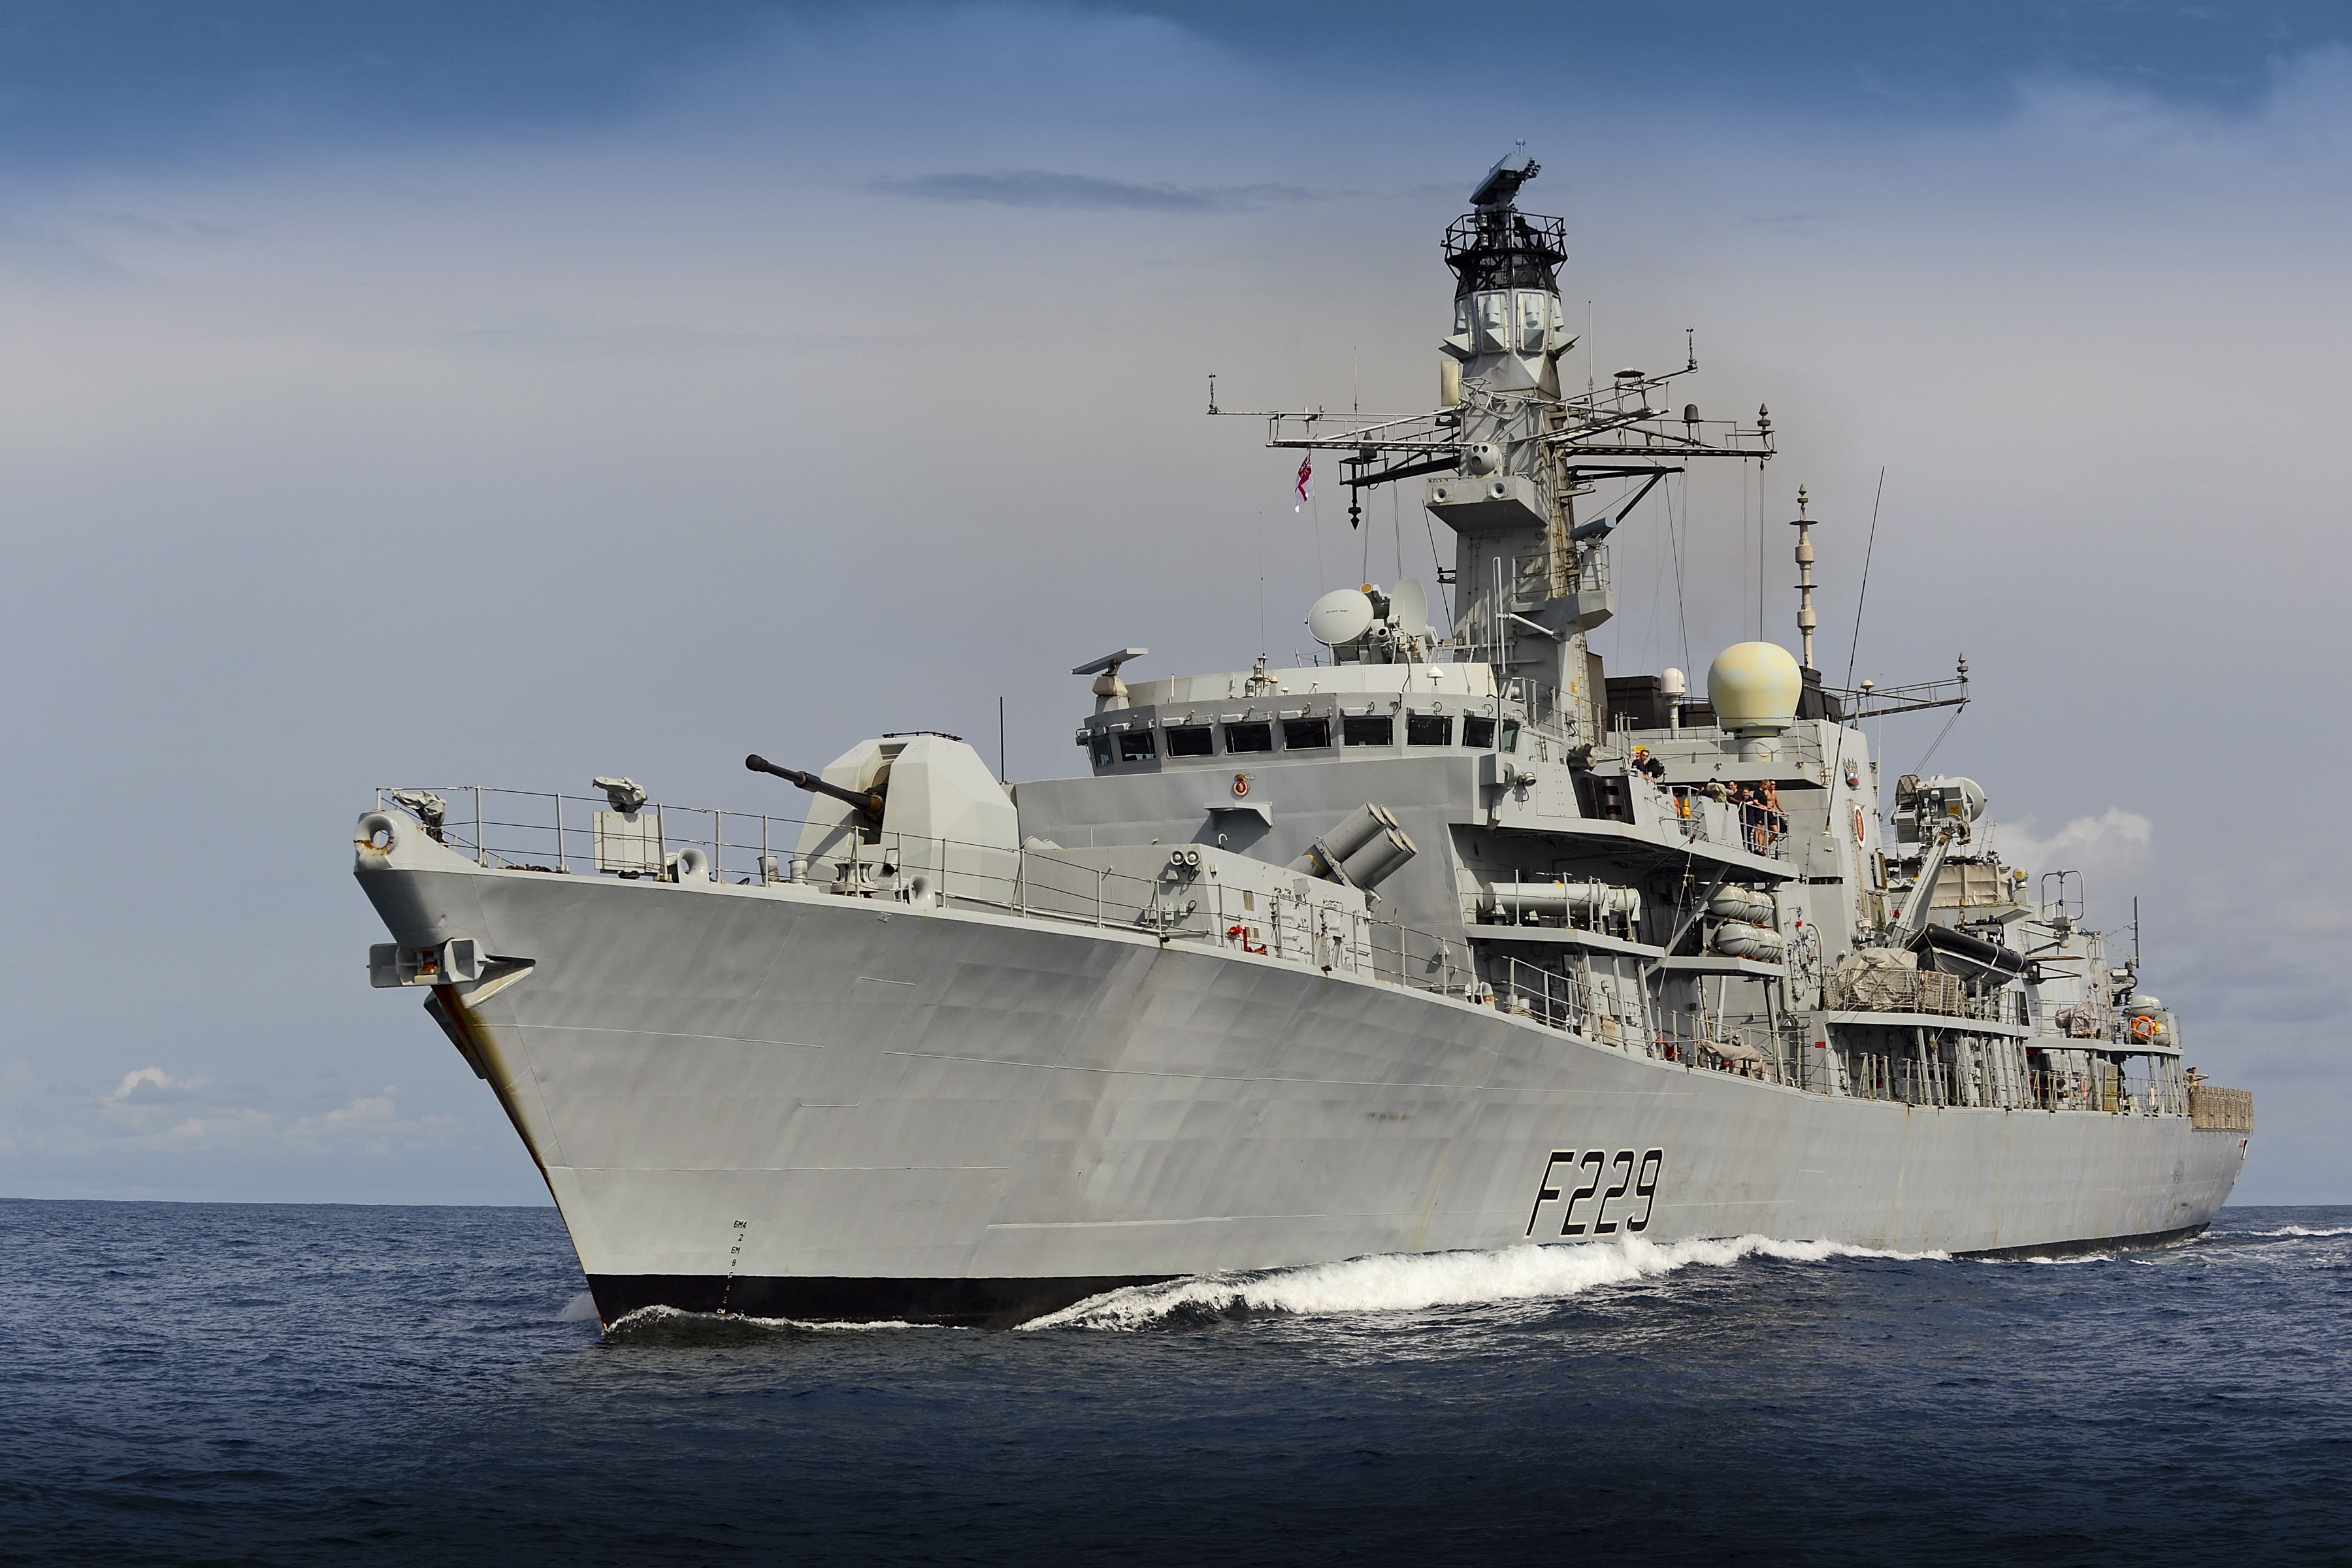 SEA has secured a five-year contract with the MOD which will see them provide in-service support to the Combat System Highway (CSH) on Royal Navy ships.